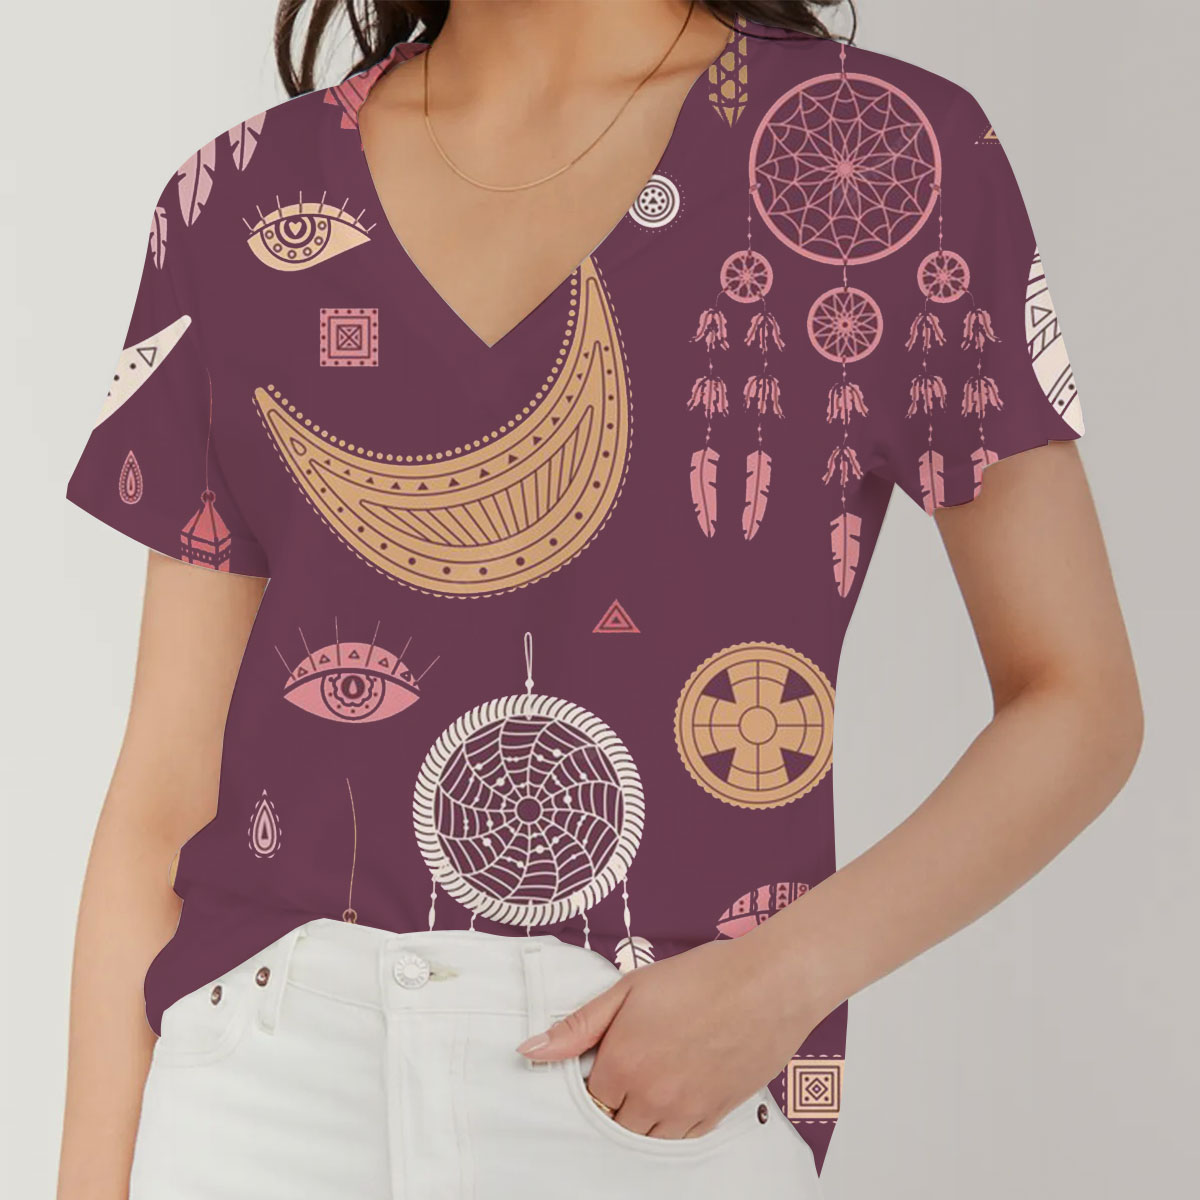 Bohemian With Dreamcatcher And Moon V-Neck Women's T-Shirt